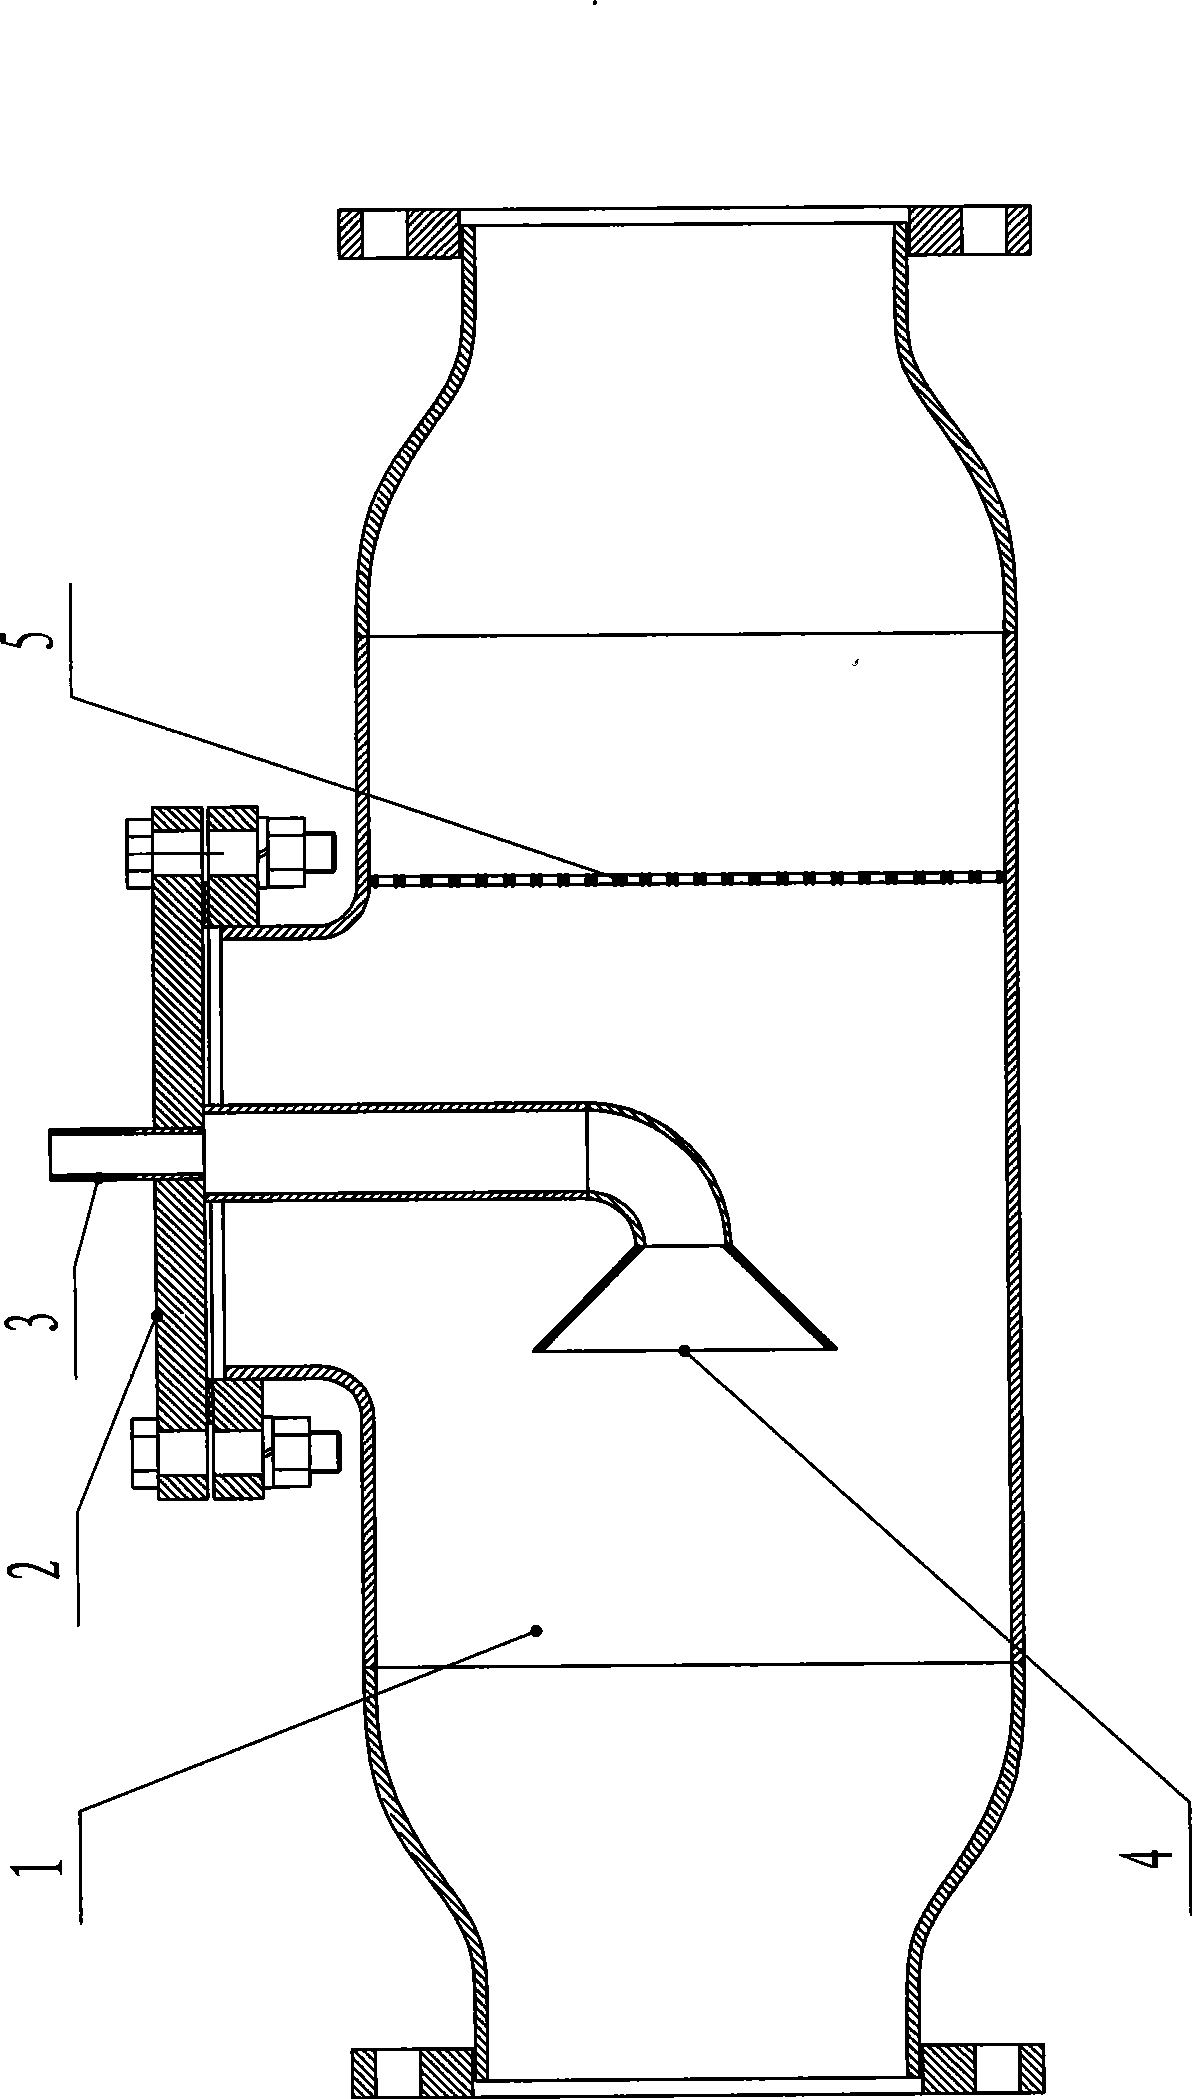 Diffusion type pipe-line mixer